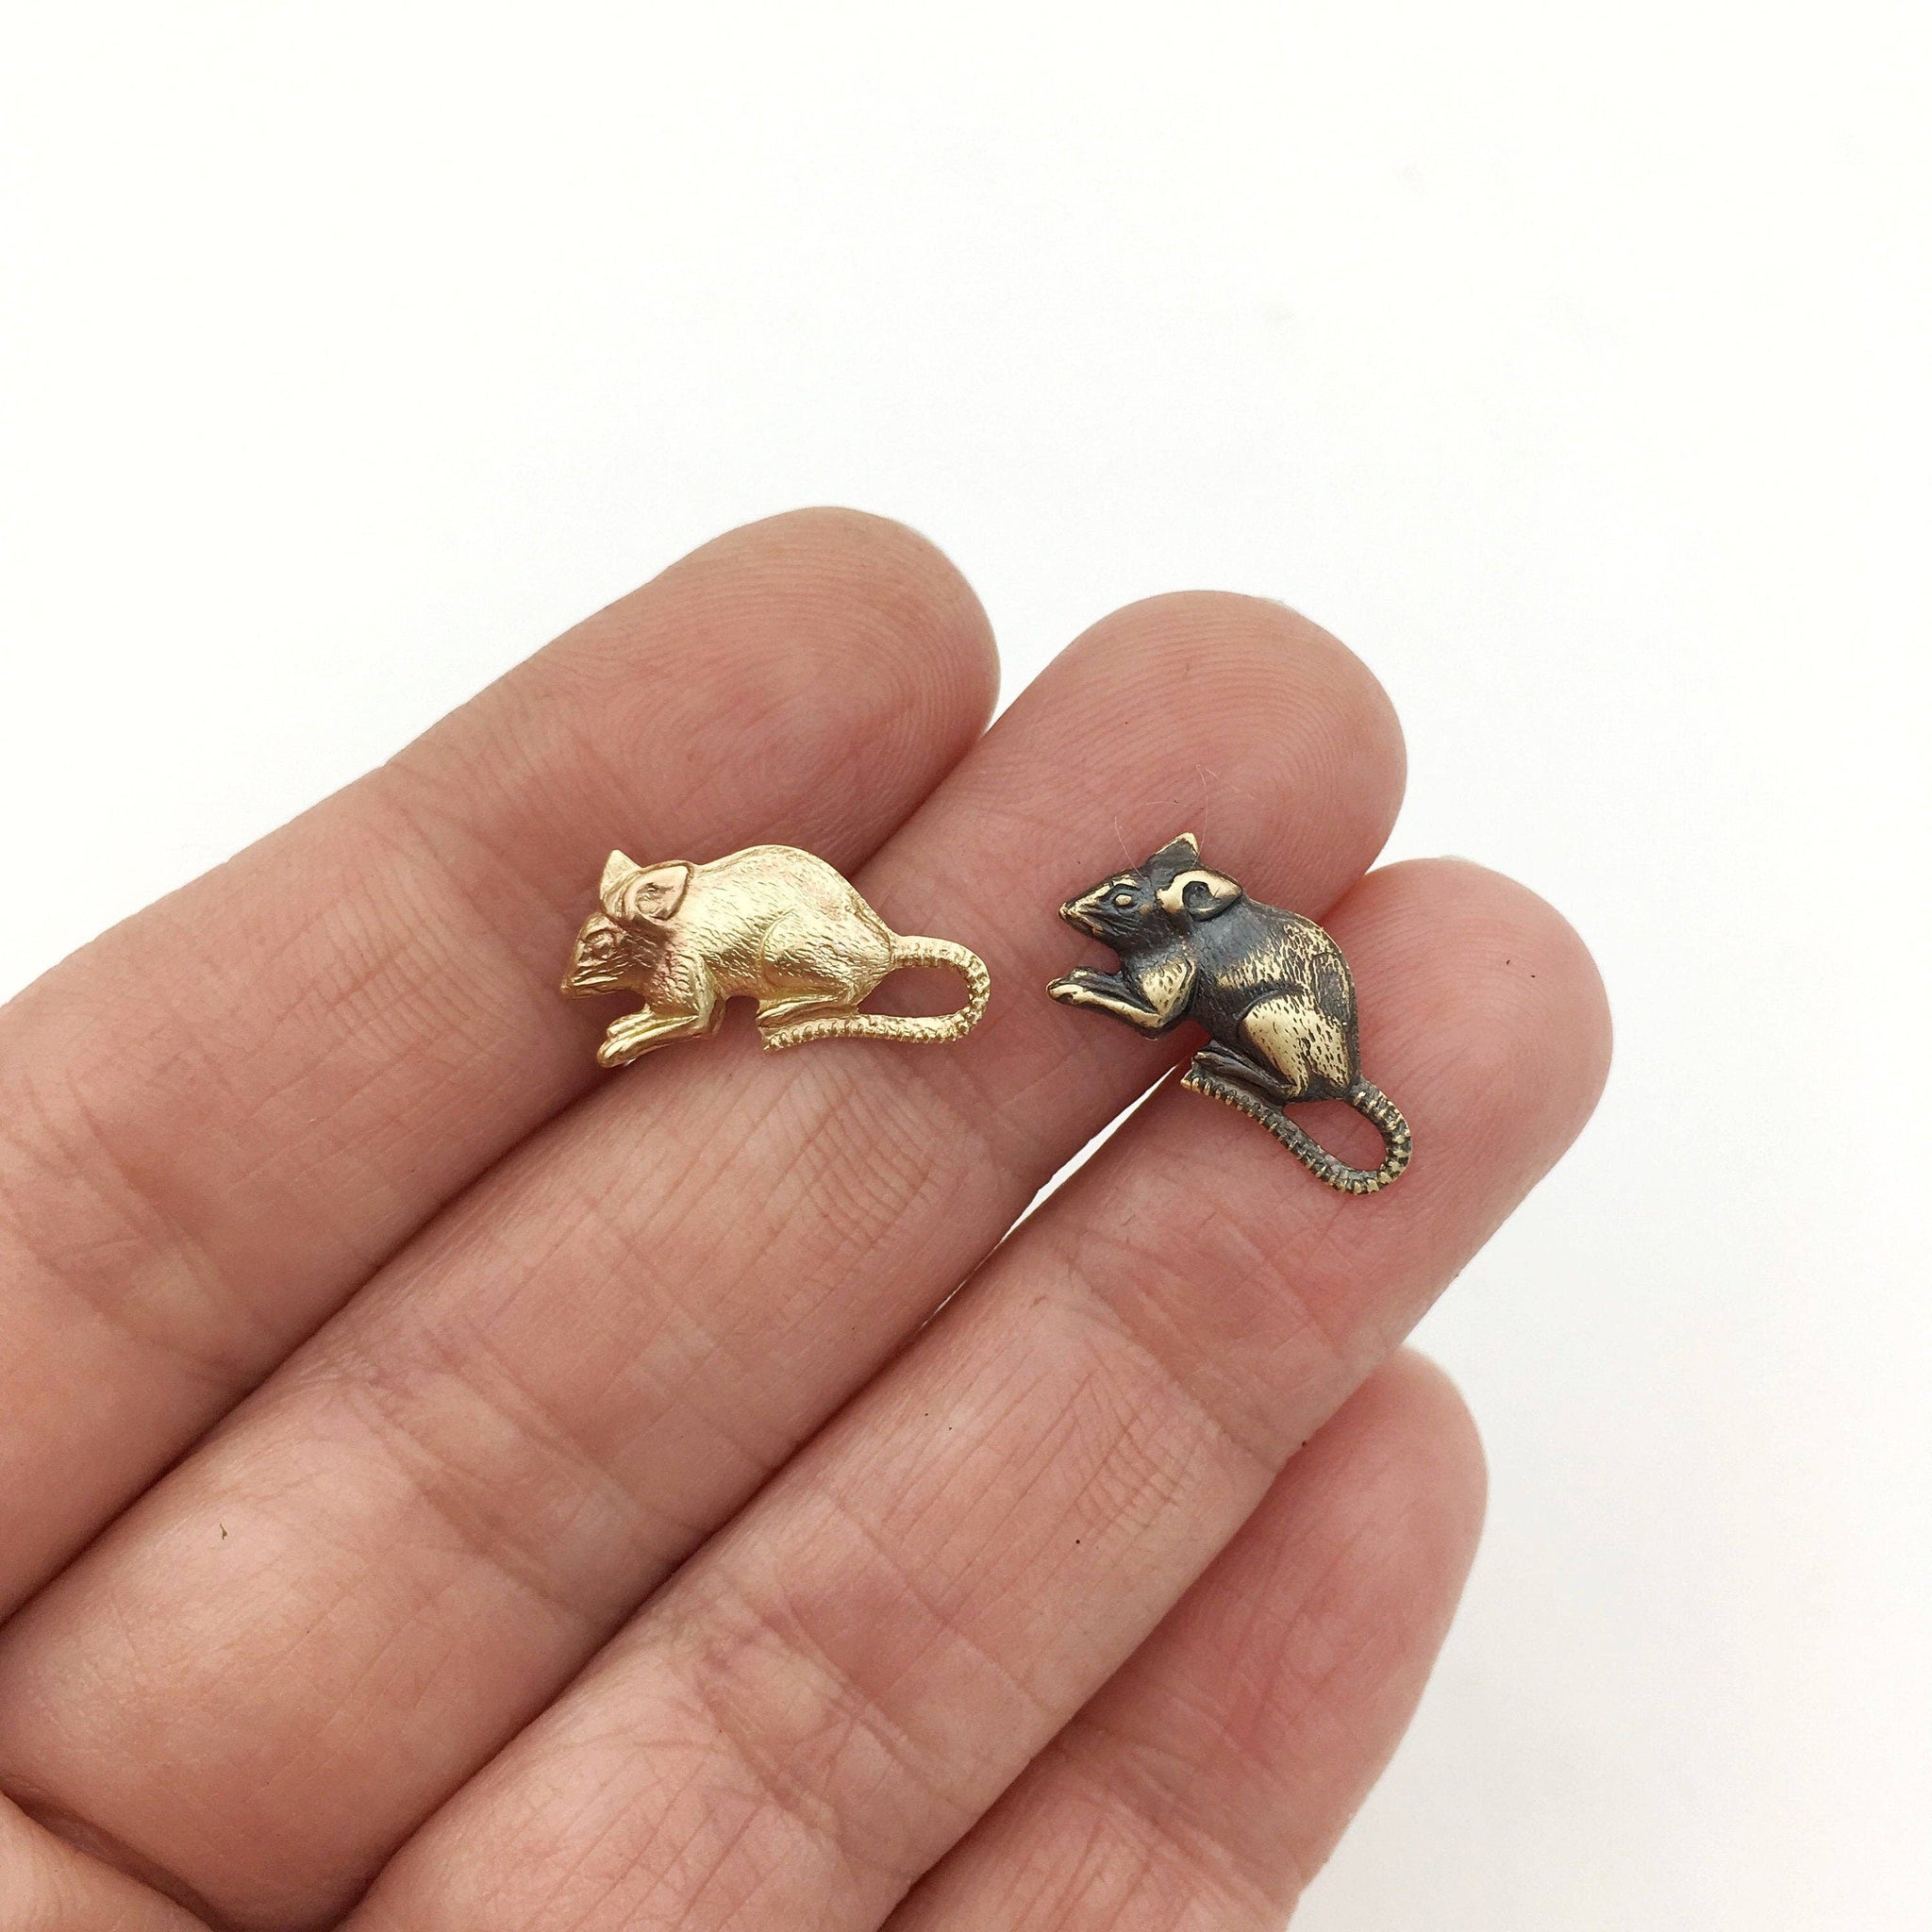 Metal Cloth & Wood - Rat or Mouse Lapel Pin Tie Tack or Brooch: Bright Gold